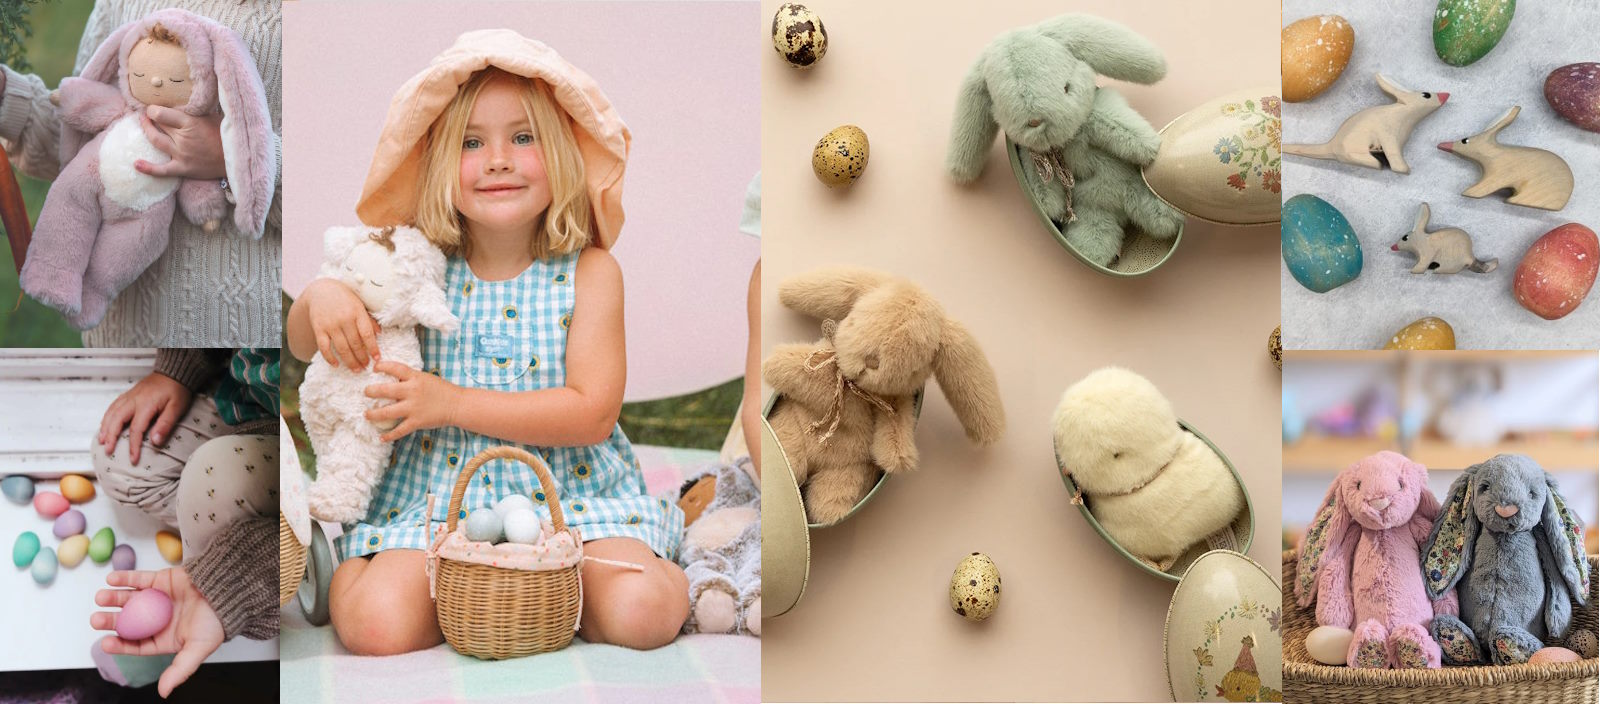 Beautiful Easter Gifts for Children at Milk Tooth Australia | Soft Toy Bunnies Lambs Chicks Wooden Toys Eggs Bilbies